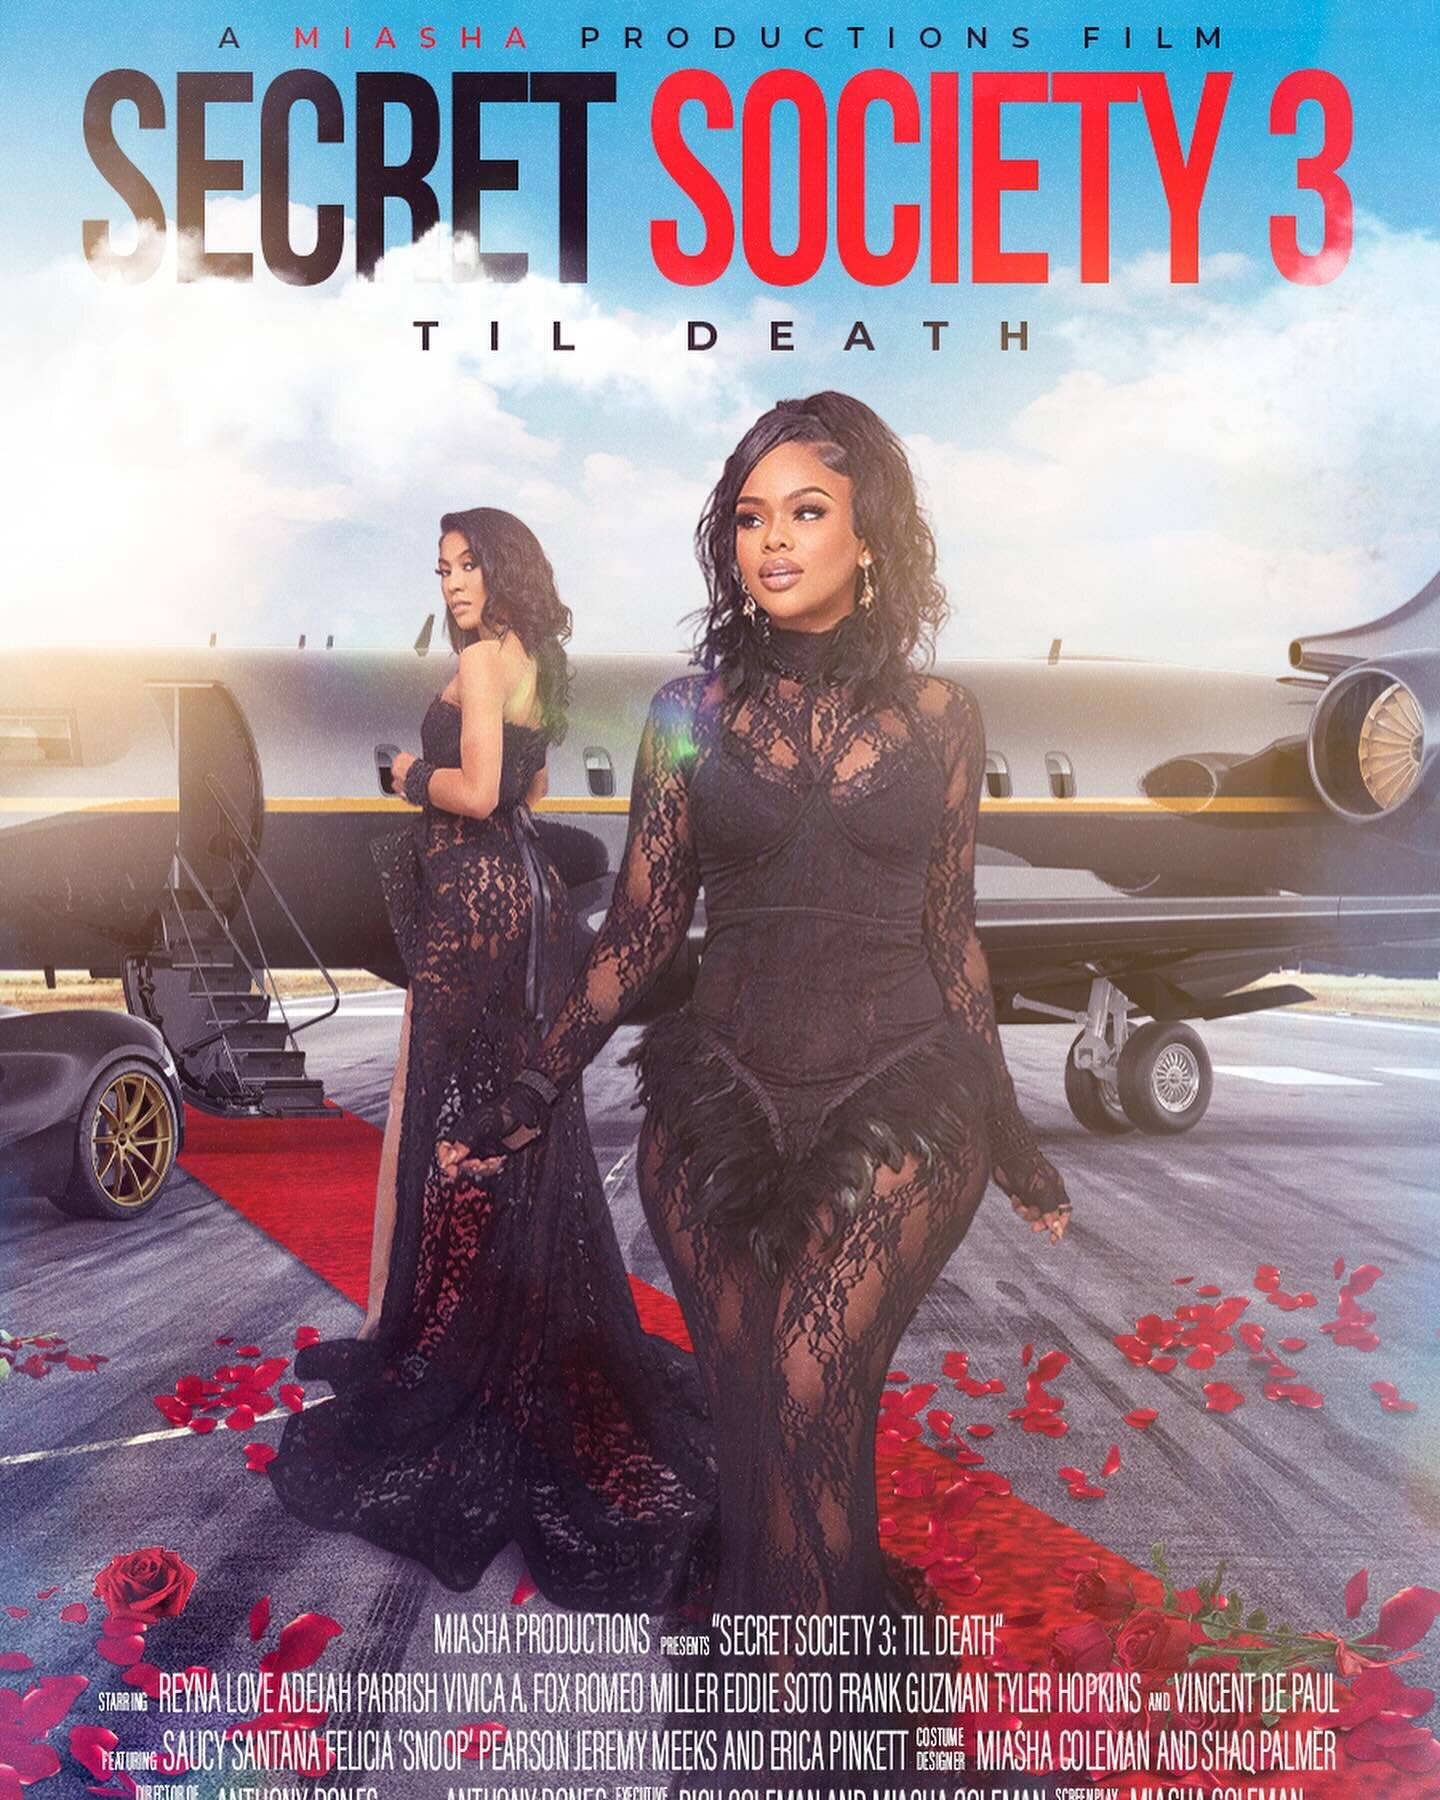 Congrats cuz!!! @miashaofficial @rich_coleman @secretsocietymovie 🎉🎉🎉🎉 Secret Society 3 is out now!! Go check out Secret Society 3 on Amazon Prime! Just 24 hours after being released independently, Secret Society 3 has over a million streams. Thi